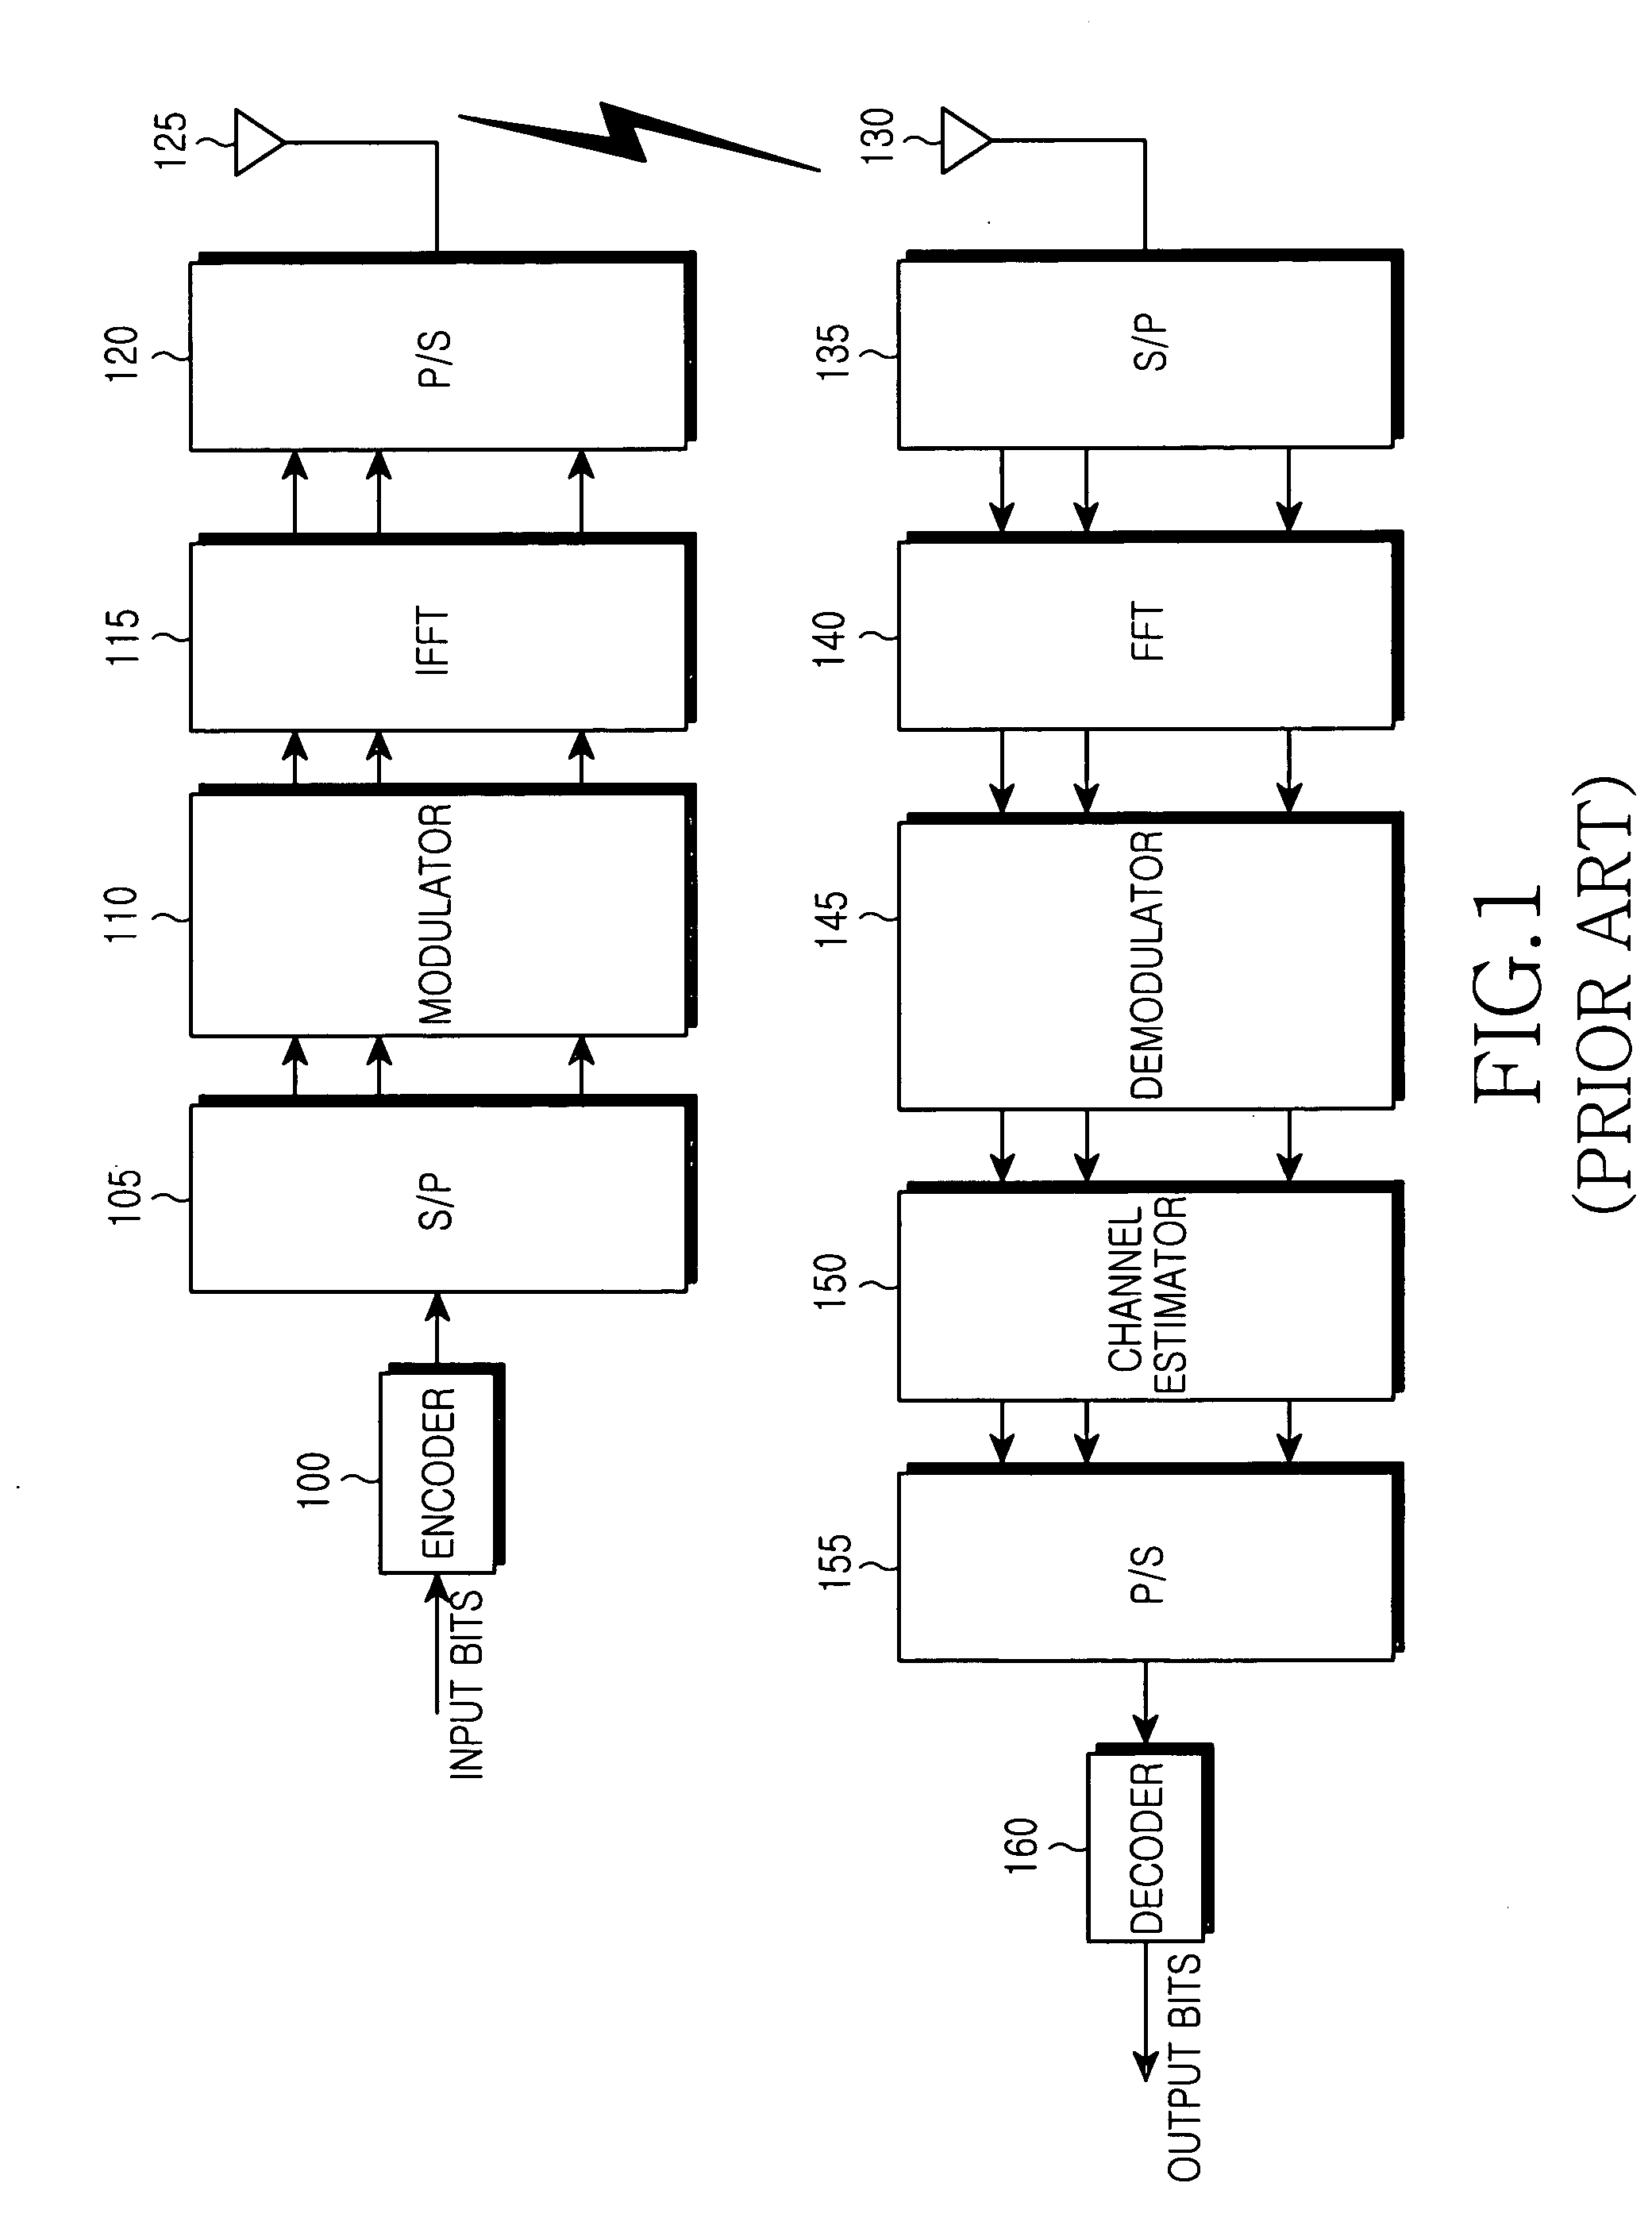 Apparatus and method for assigning sub-carriers in an orthogonal frequency division multiplex system